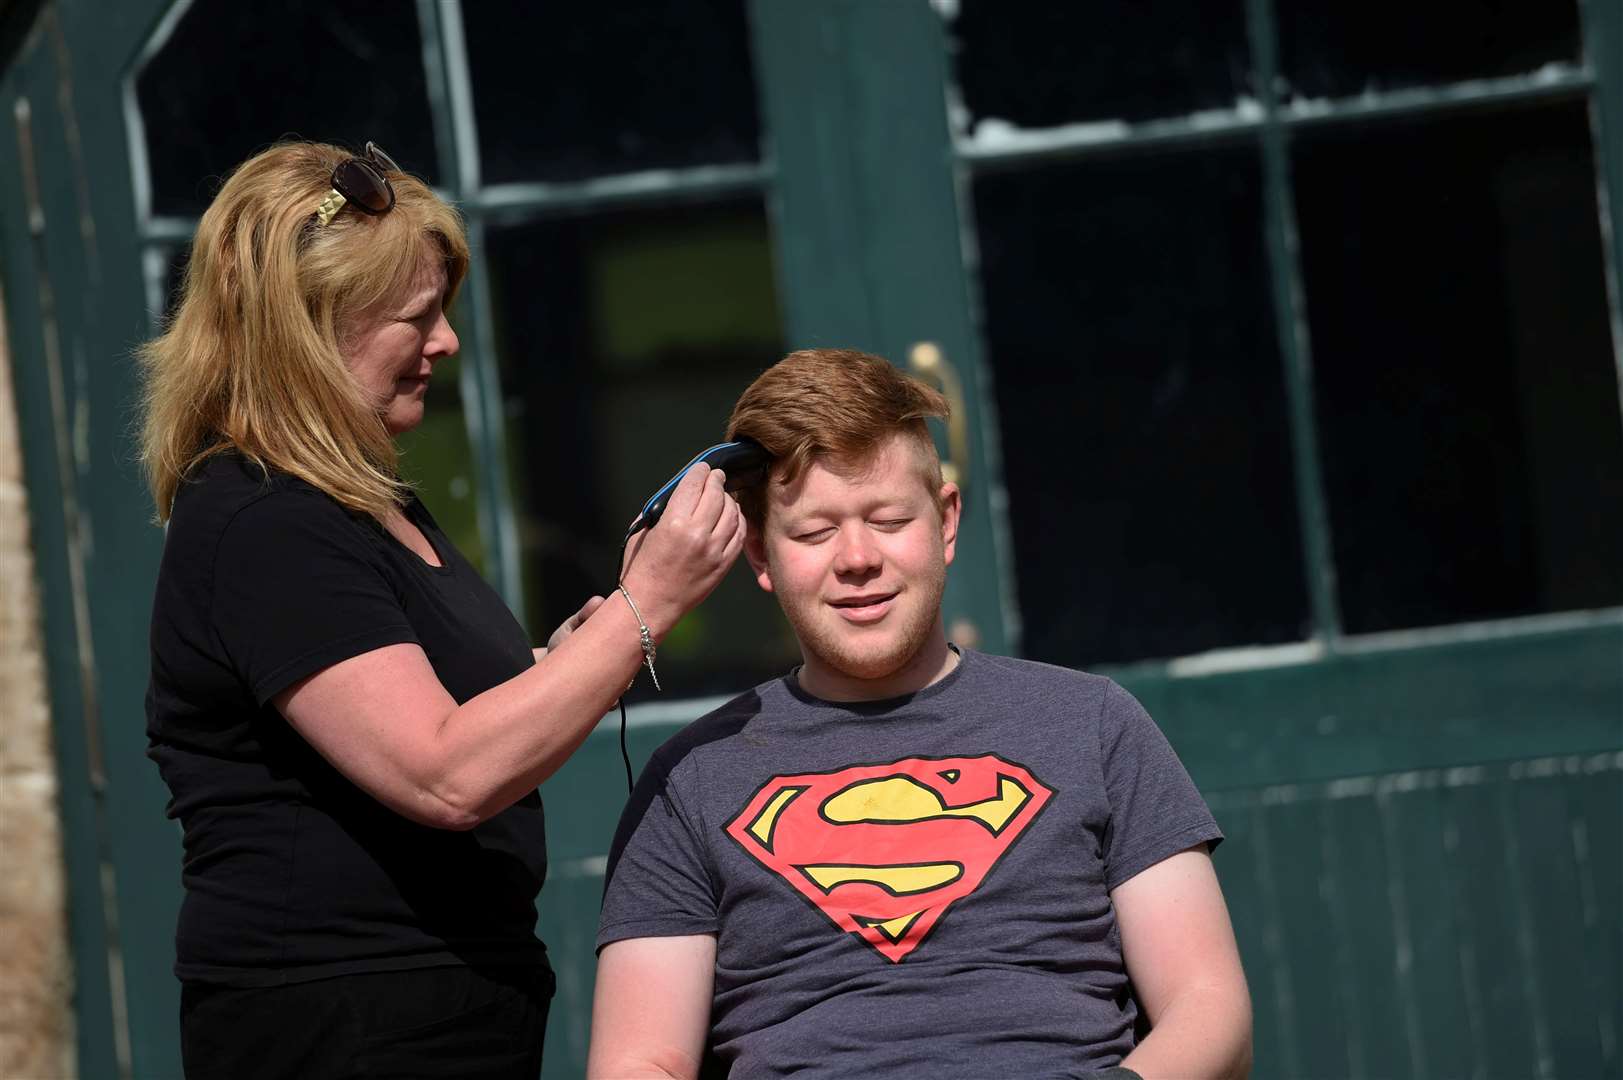 Miriam Veals is the makeshift barber for Harry Ward. Picture: Callum Mackay